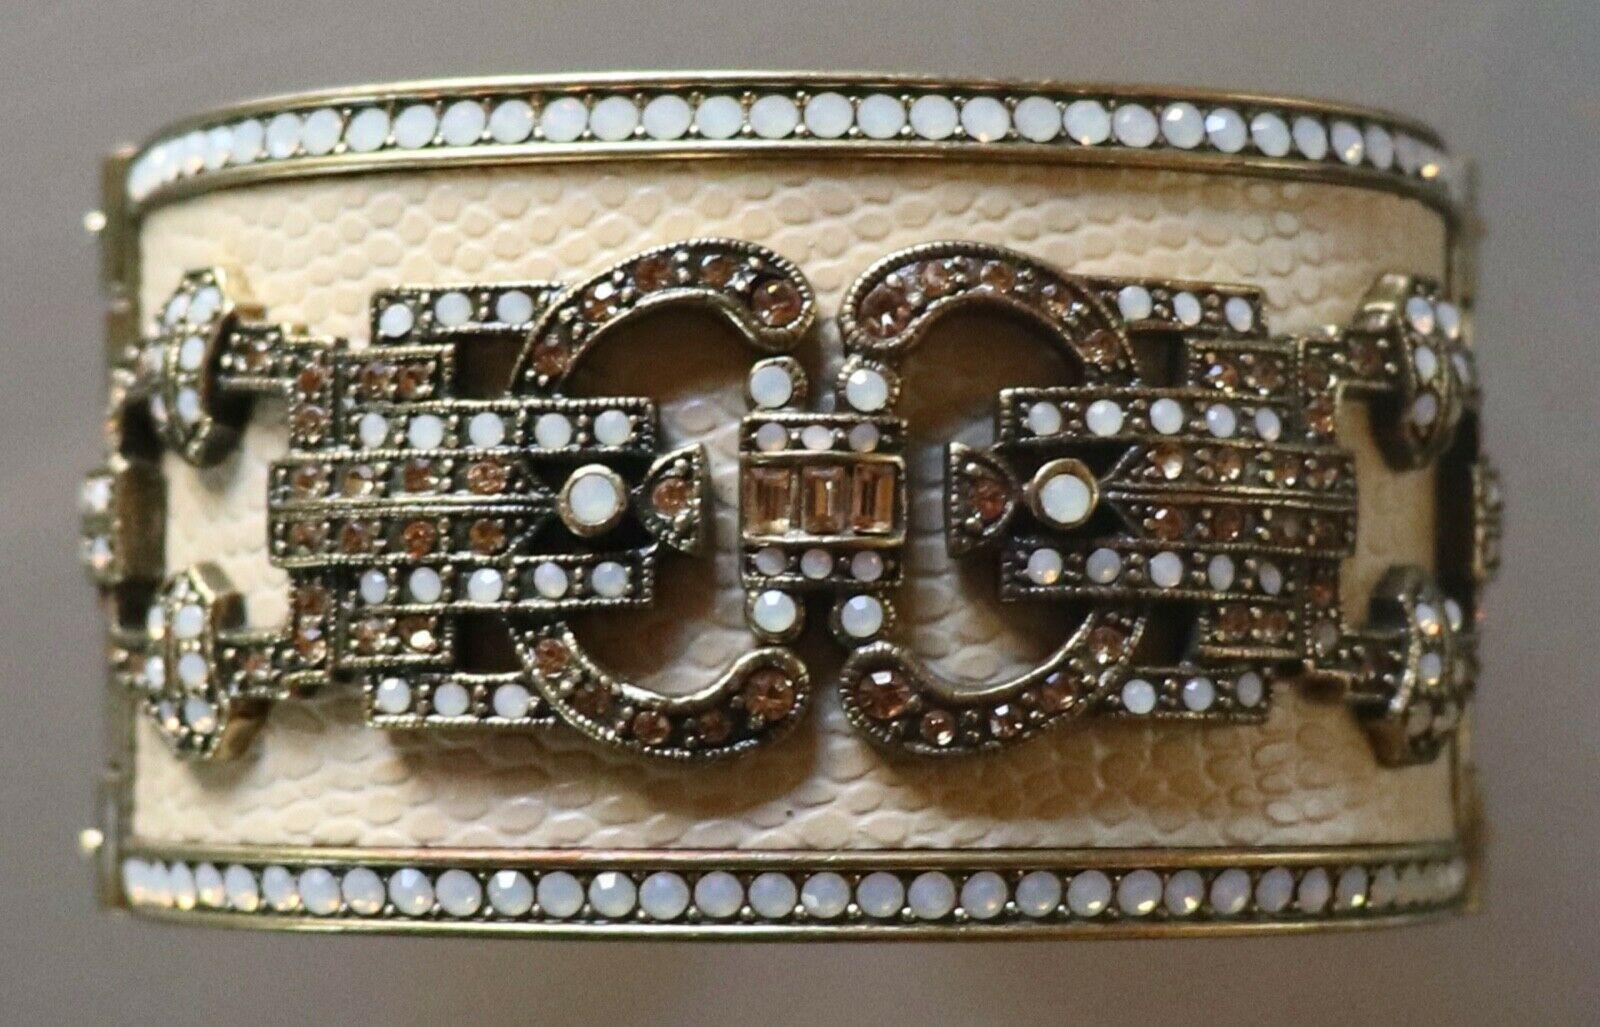 Simply Beautiful Double Hinged Ecru Enamel Cuff Bracelet, outlined in Crystals and center embellished with multi-colored Swarovski Crystals in an ornate design; over embossed Leather. Measuring approx. 1.63” wide x 6.5” inside Circumference x  0.50”